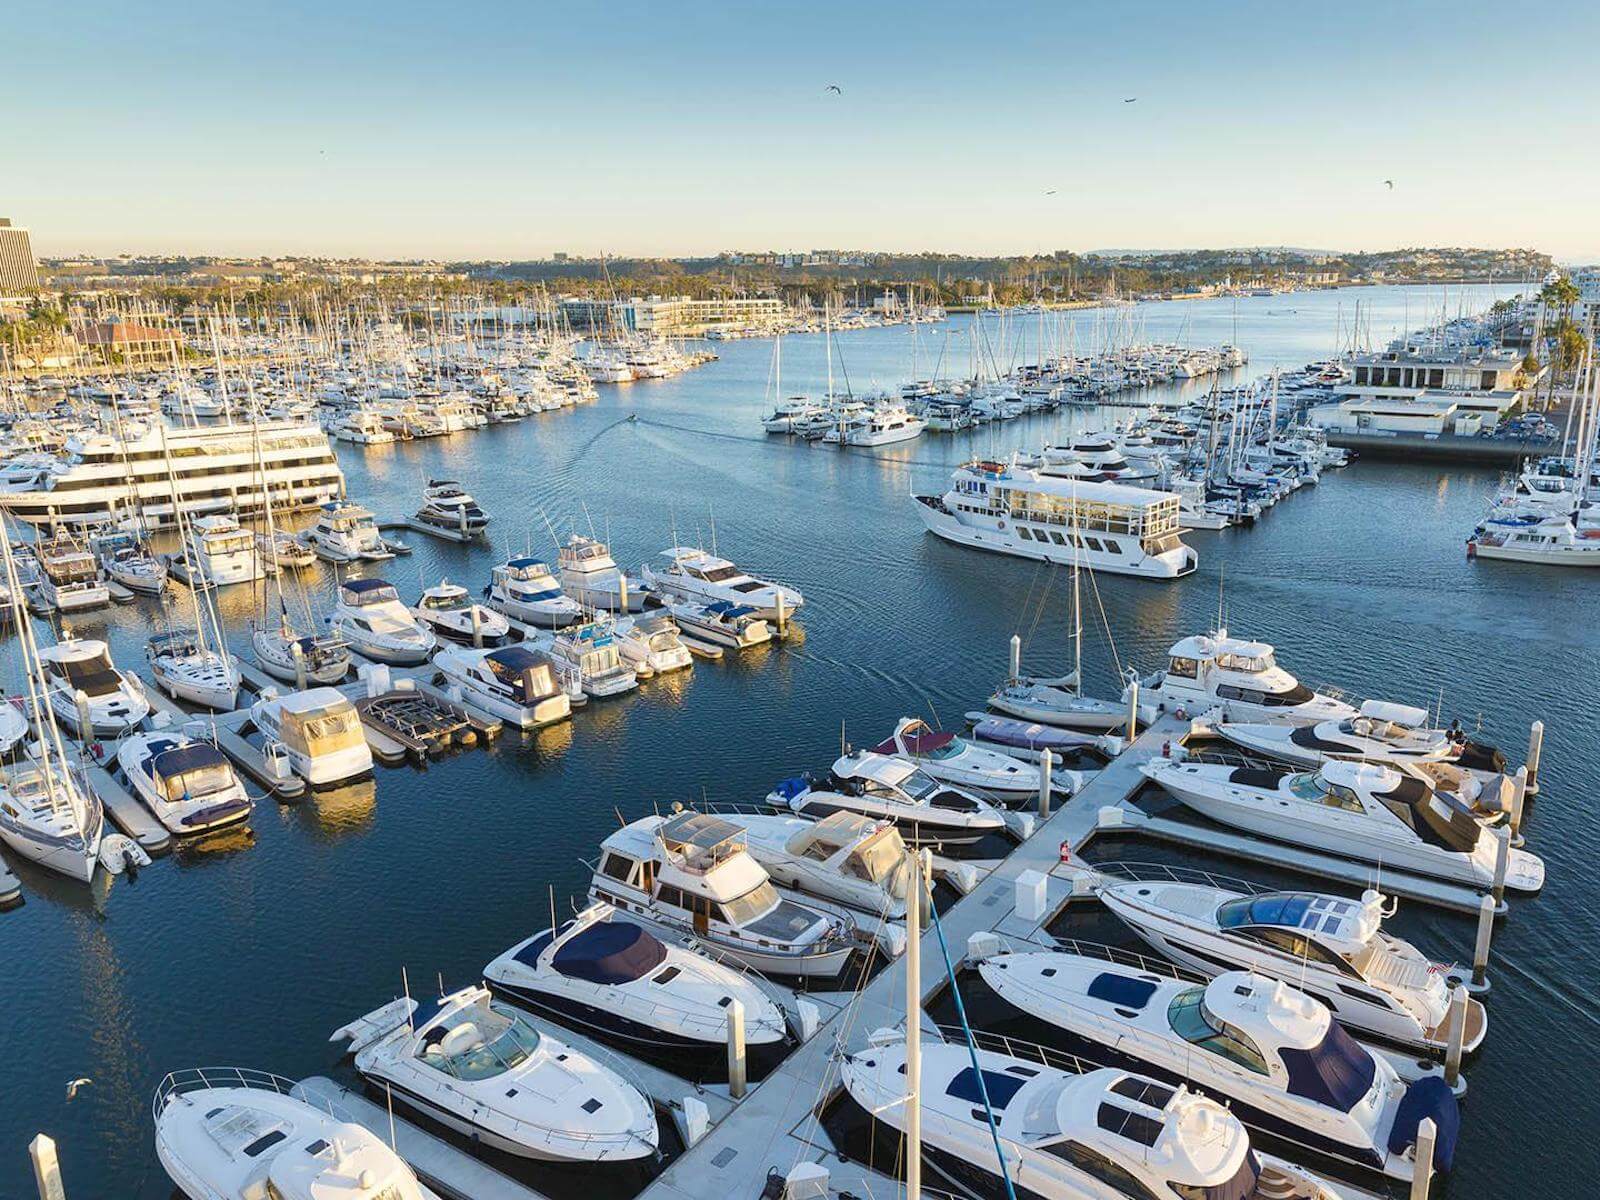 Yacht club in Marina Del Rey with large yachts lined up in a marina.